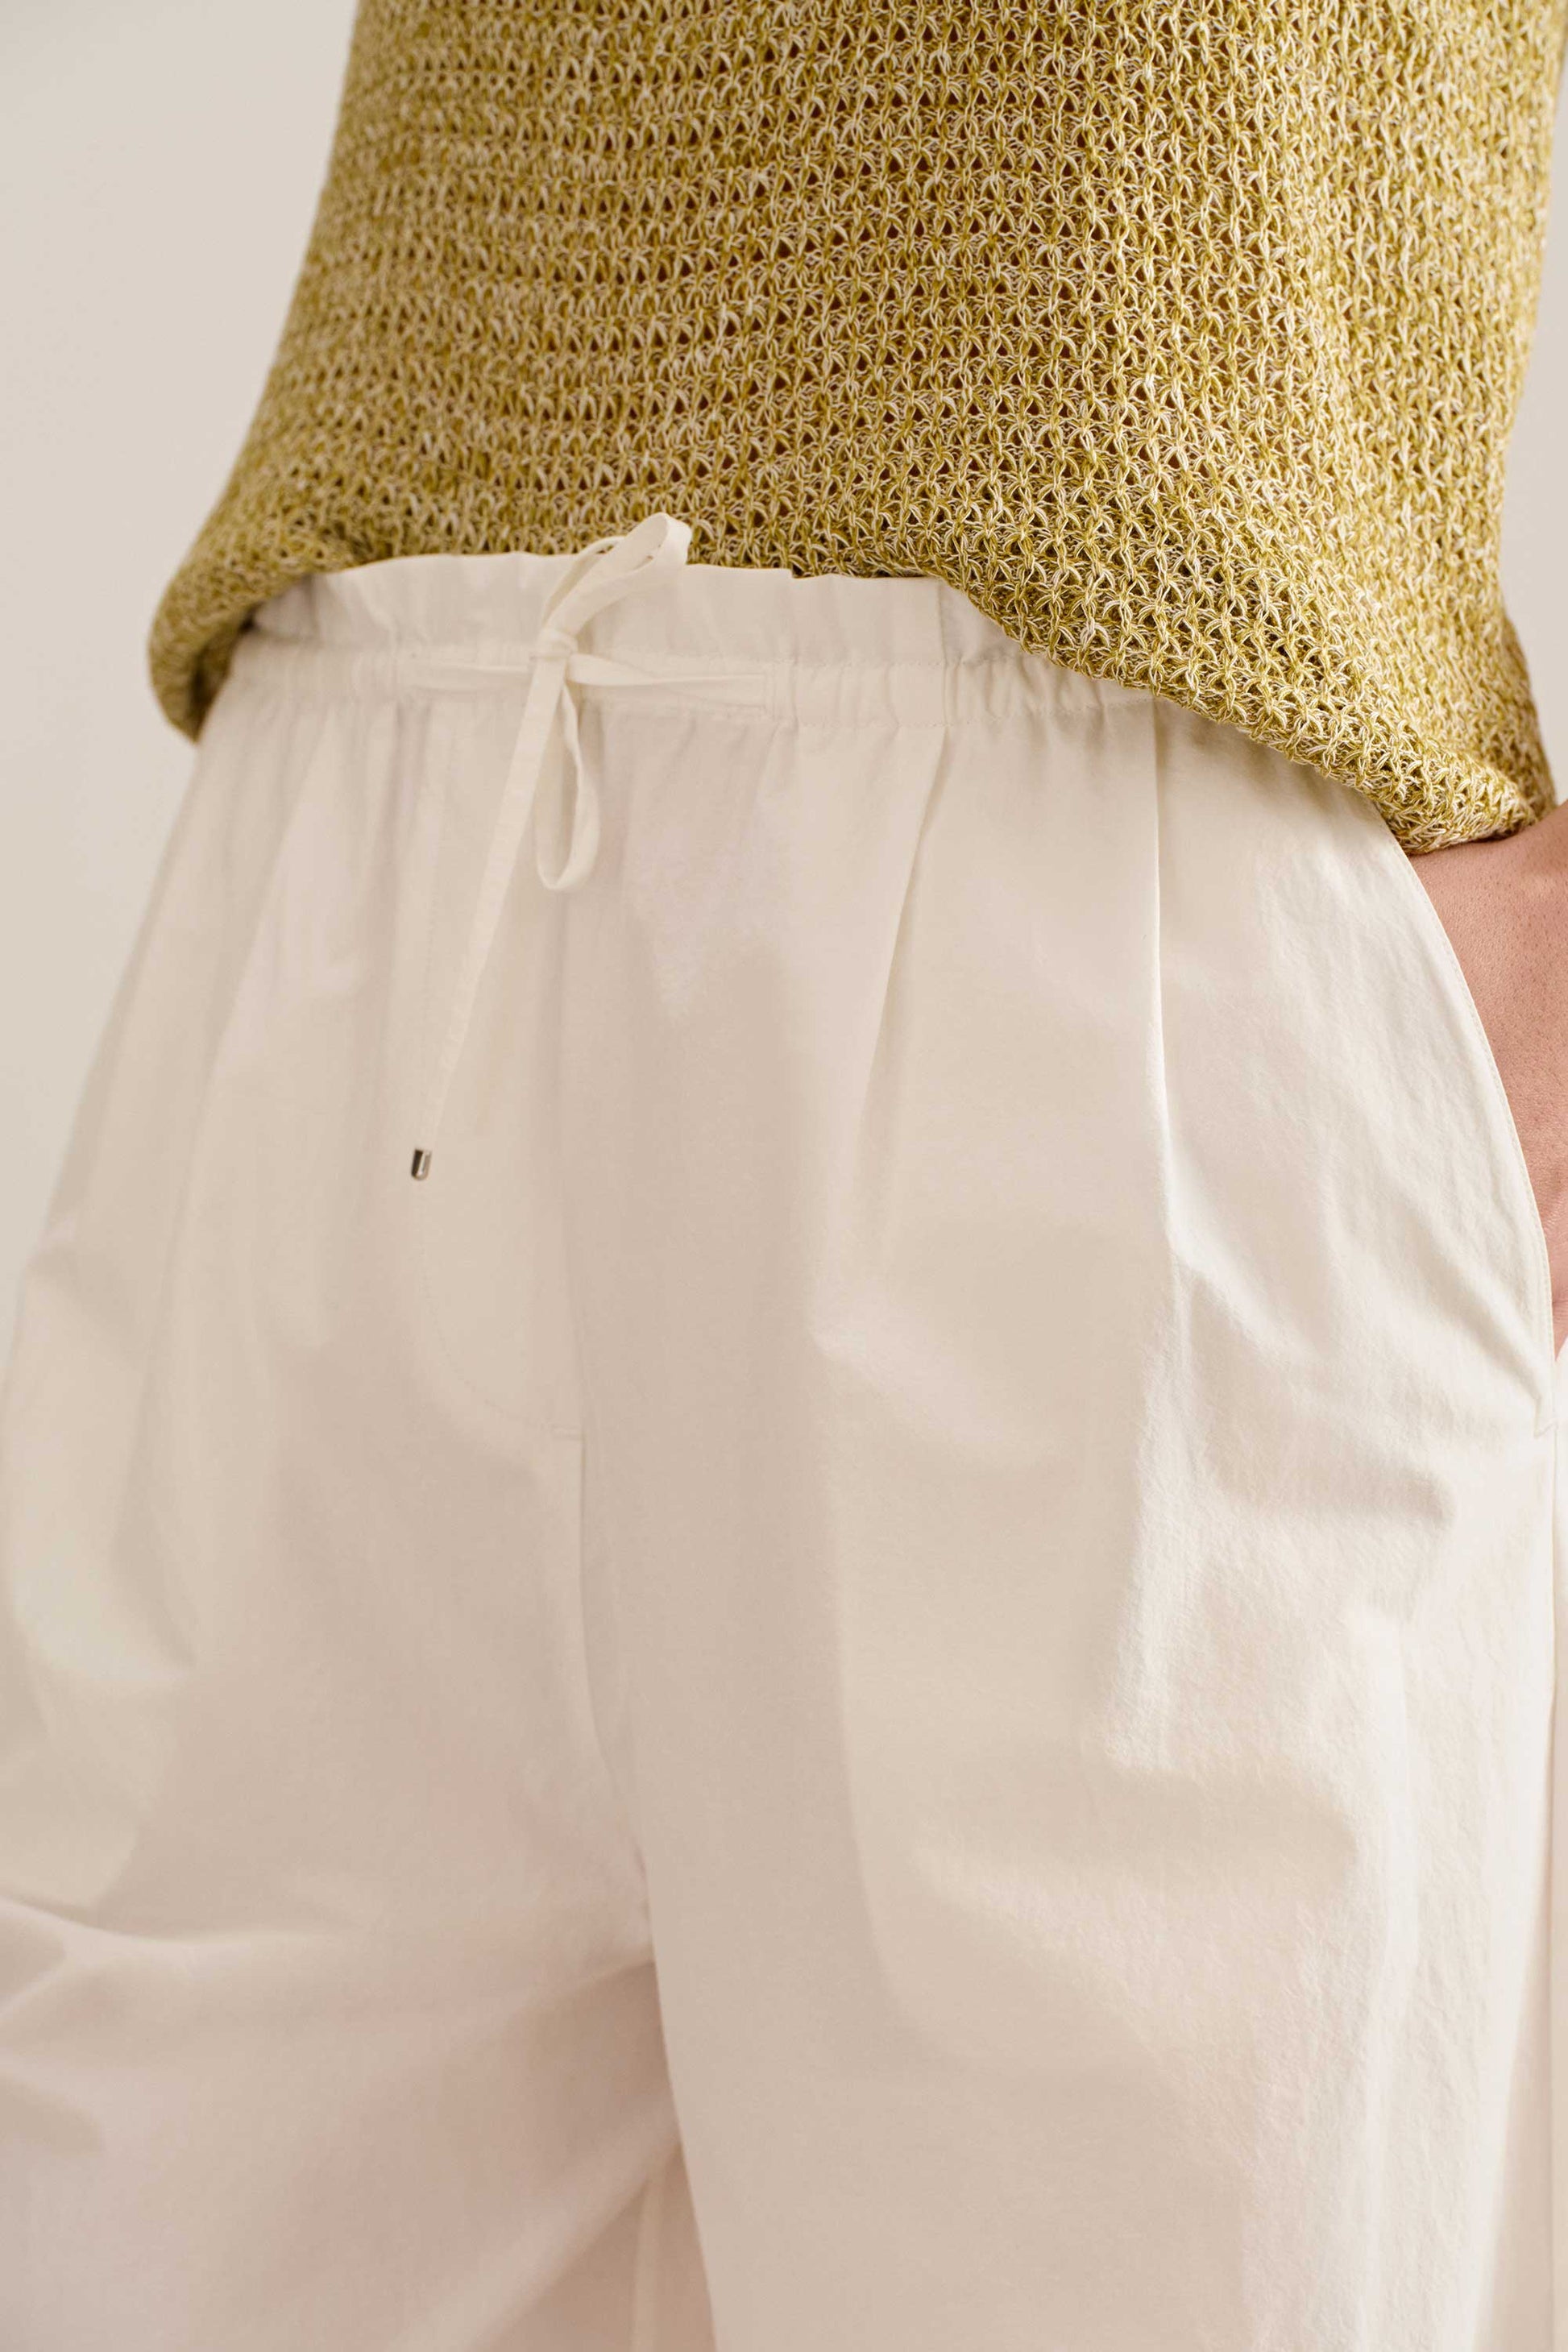 close up detail of a knot tying on the white wide leg pants.